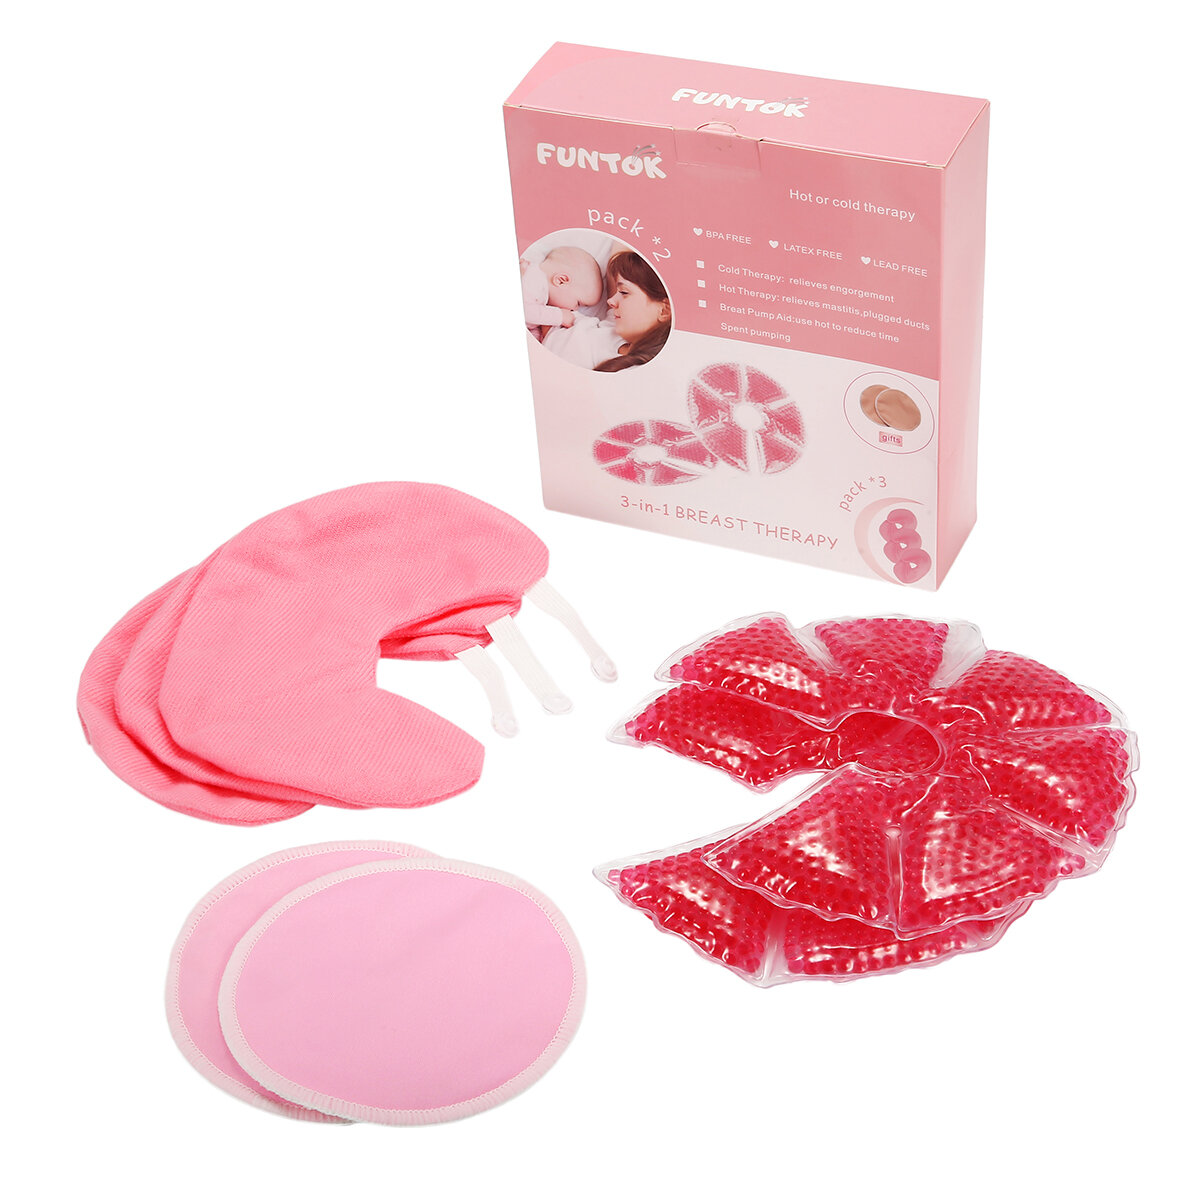 Gel Breast Ice Pack 2 Gels + 3 Cloth Bags + 2 Nipple Patches + Color Box